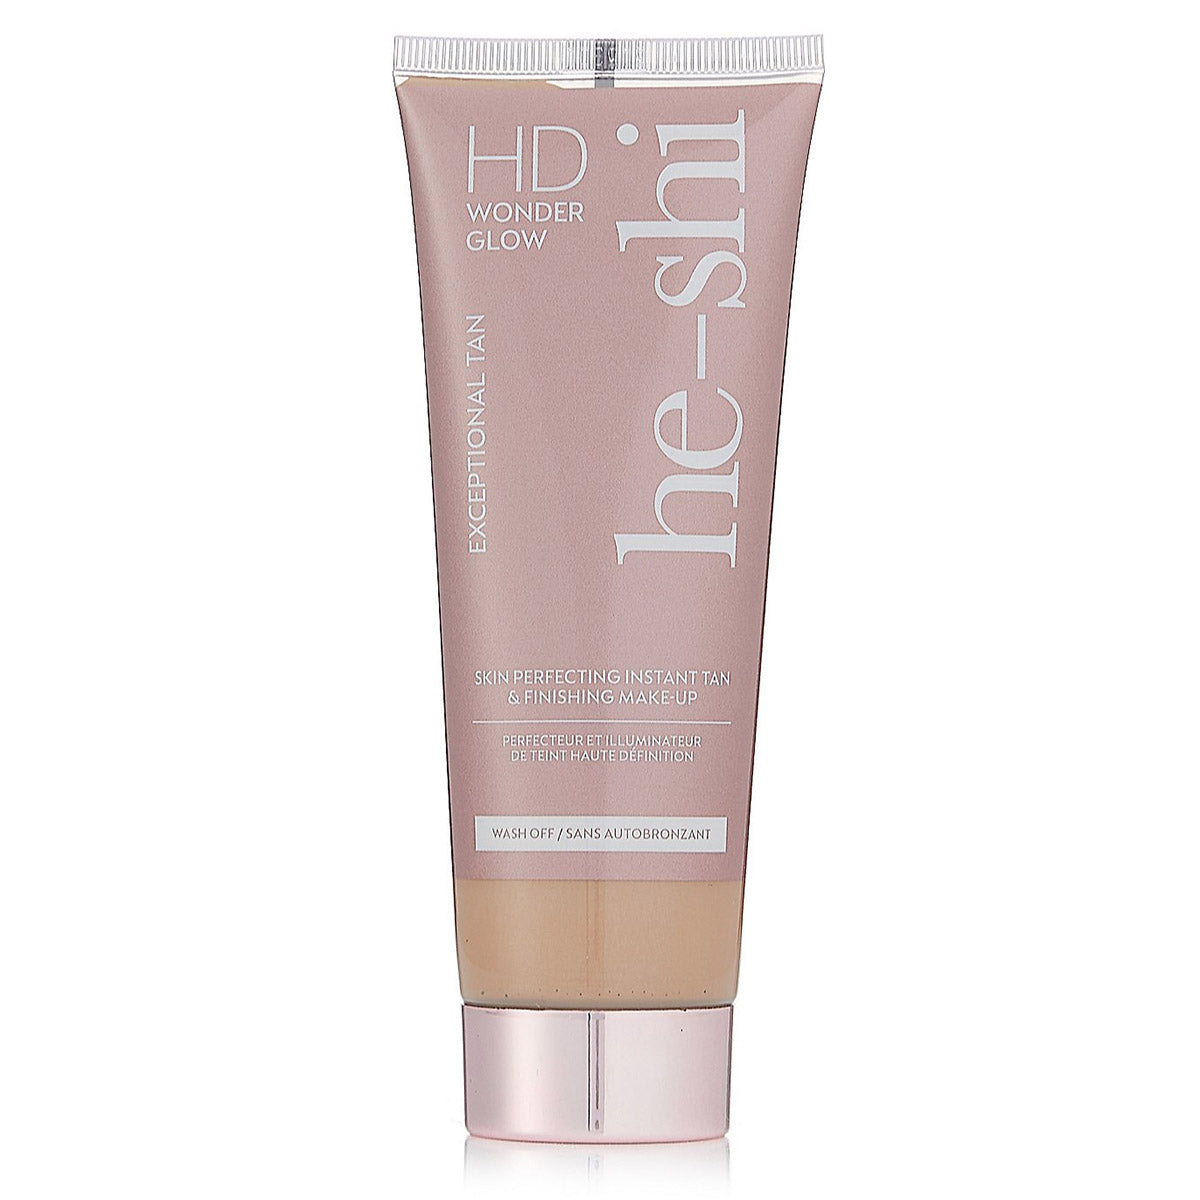 He-Shi HD Wonder Glow Perfecting Make-Up - Touch of an Angel Wellness and Beauty